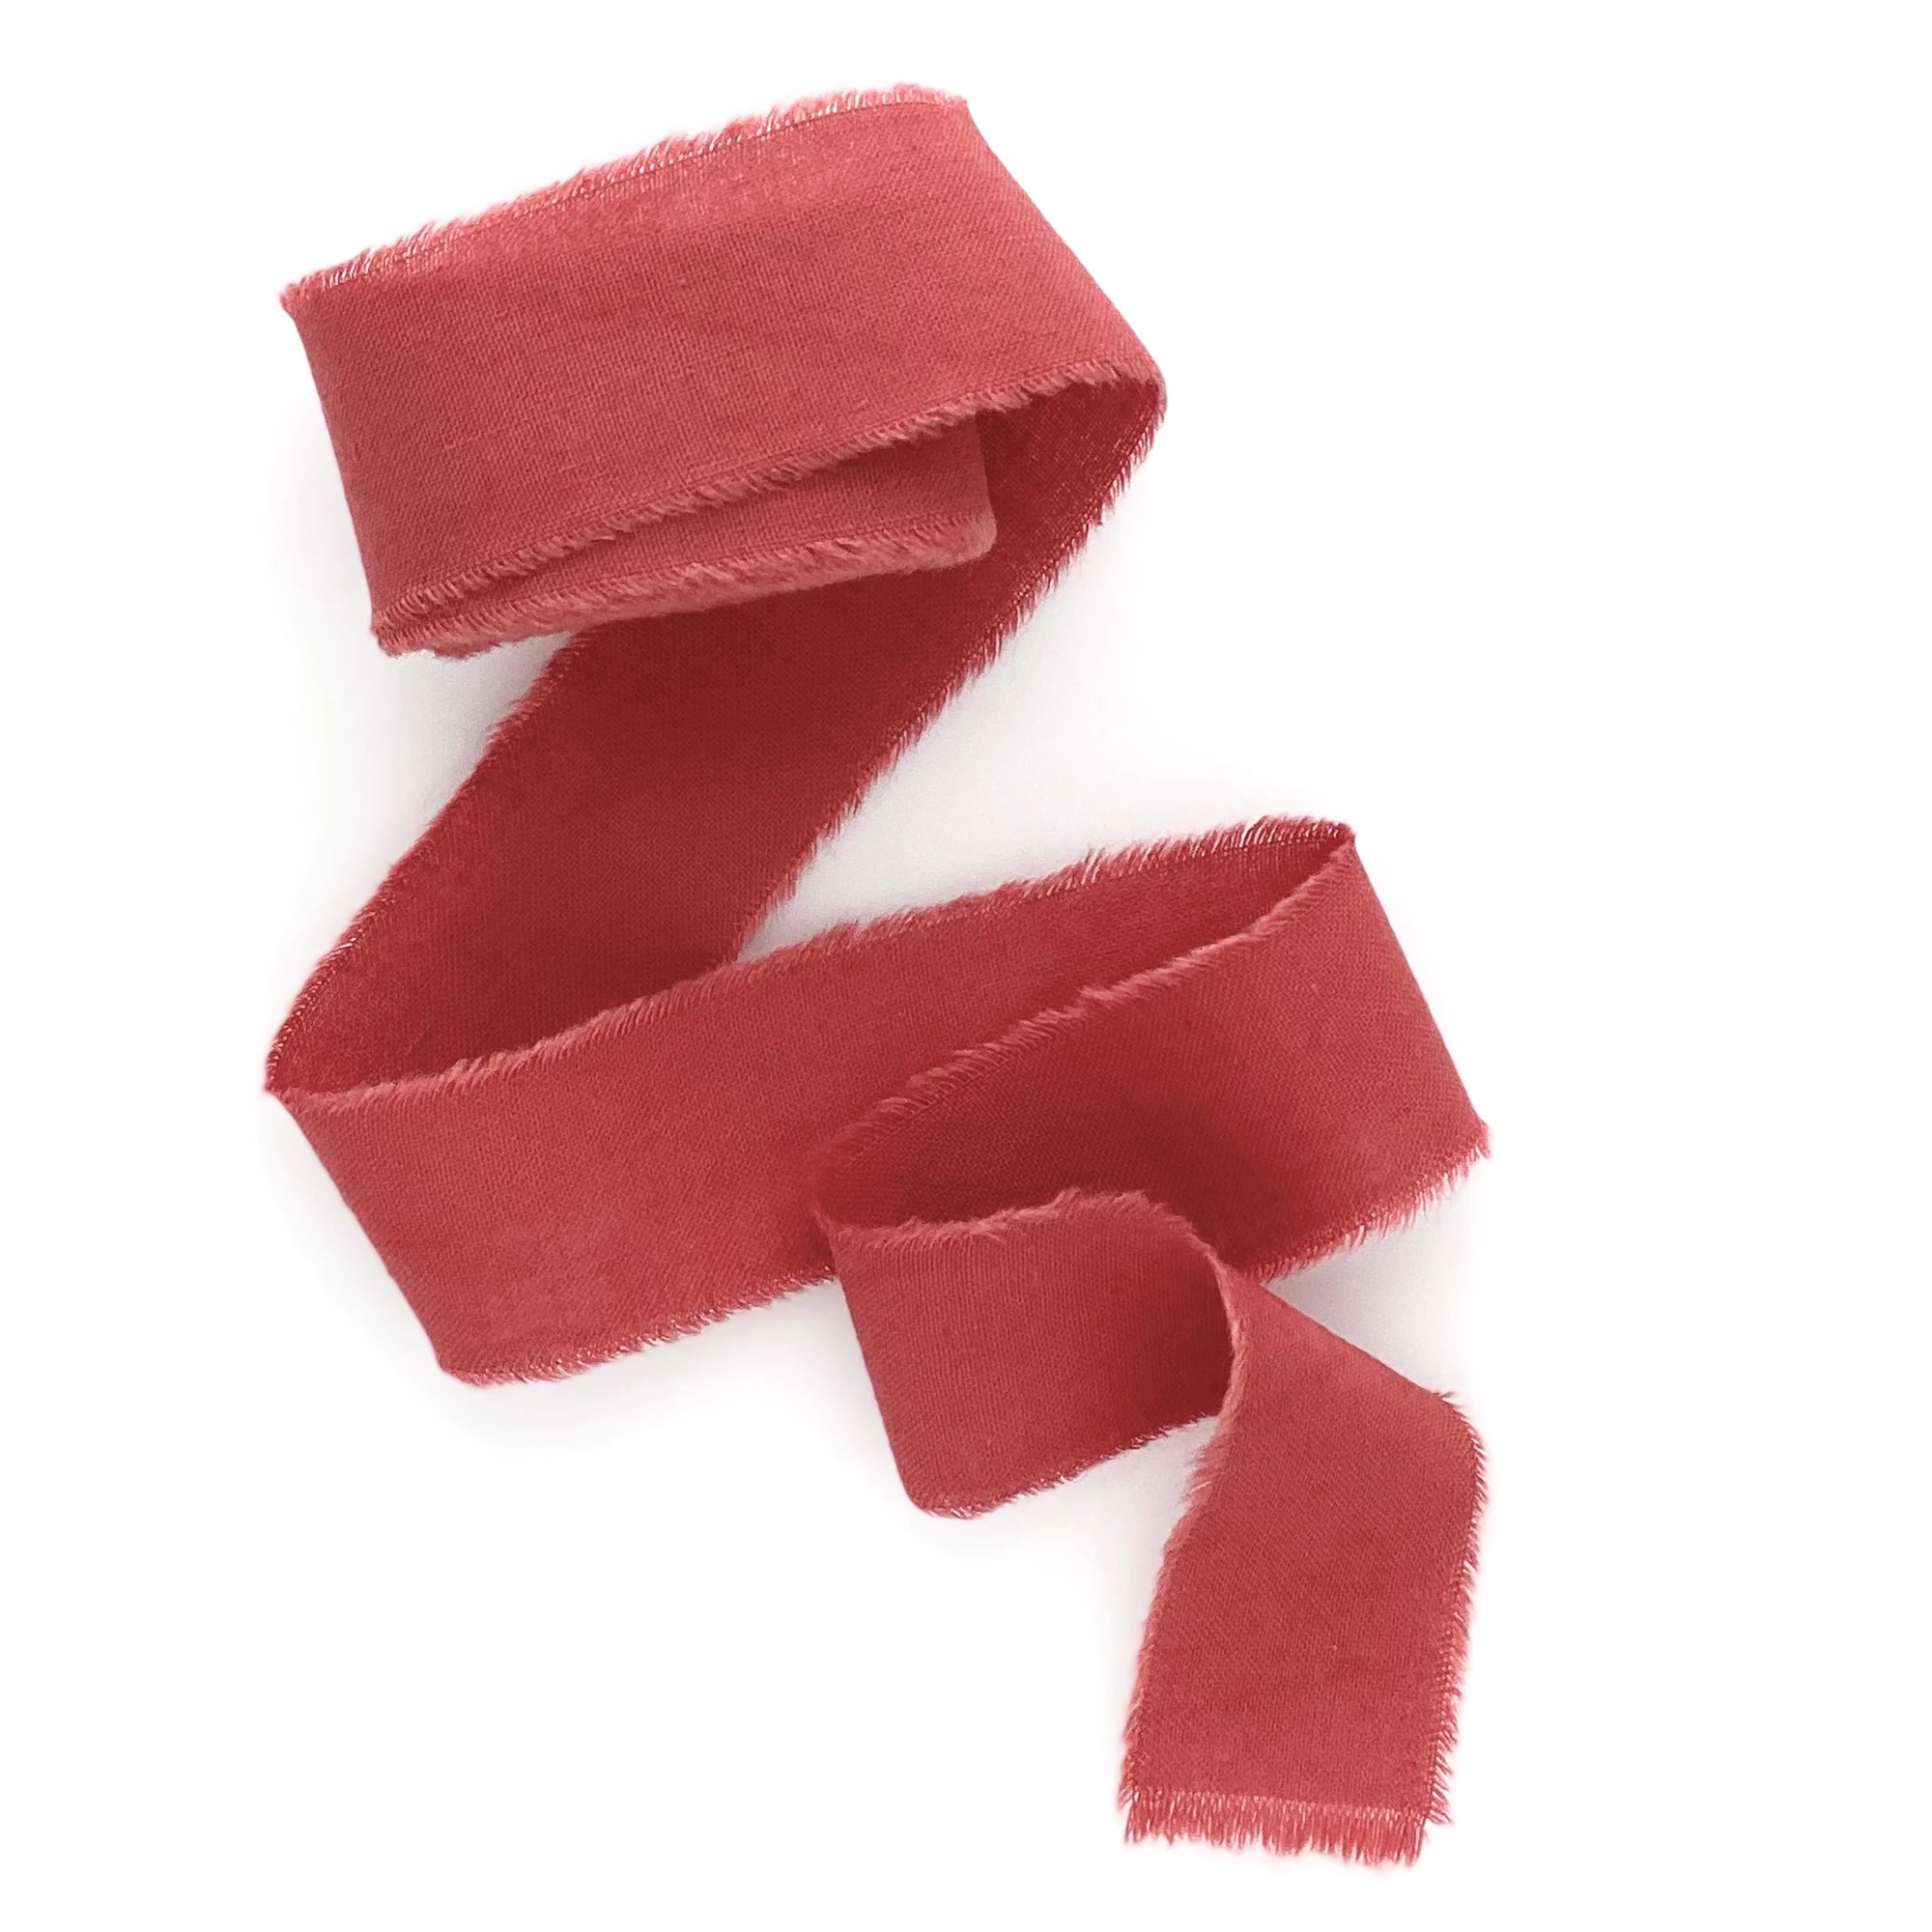 Redwood pale red color silk cotton handmade frayed edges ribbon 1 inch wide